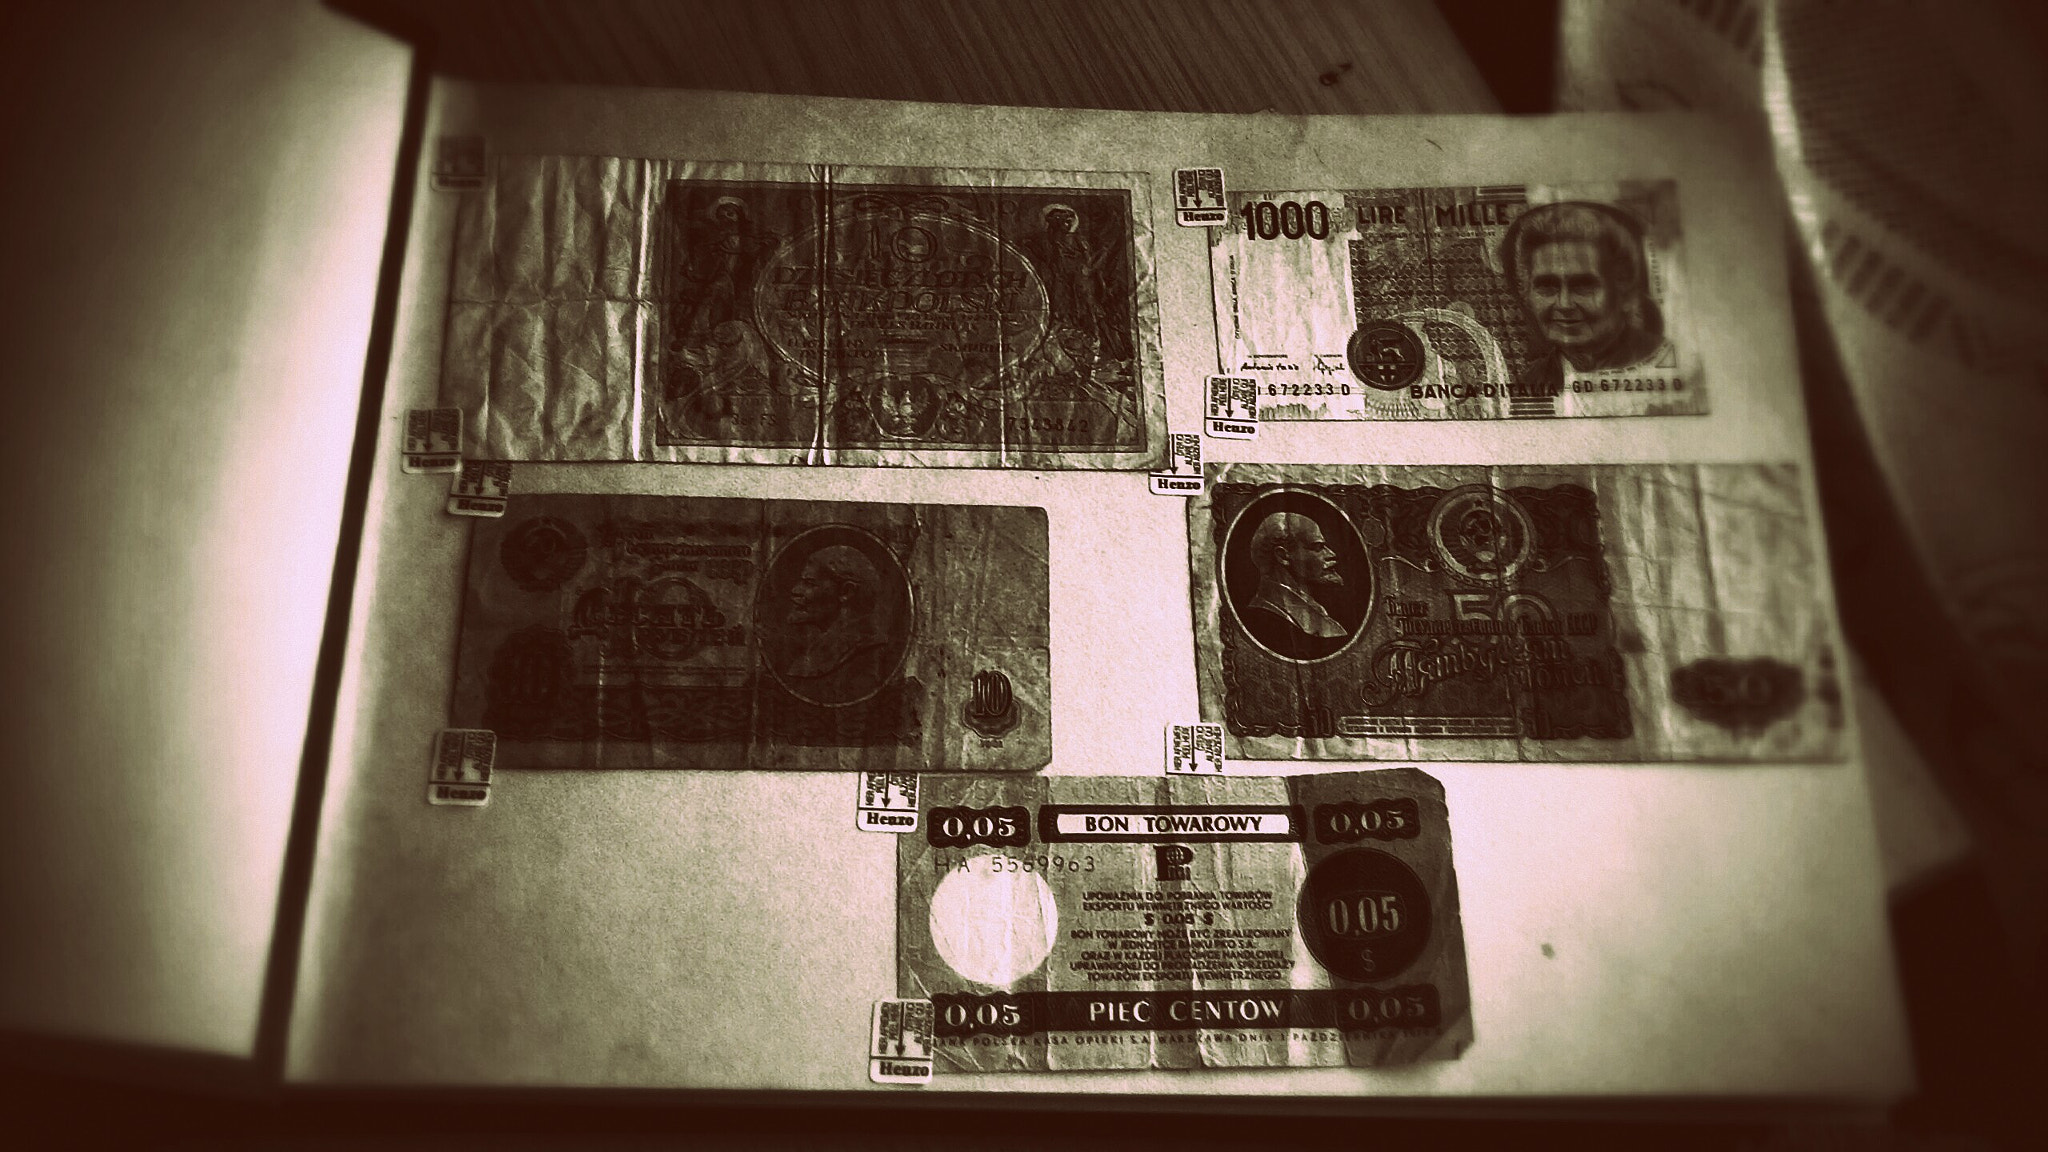 LG LEON sample photo. Old banknotes... photography